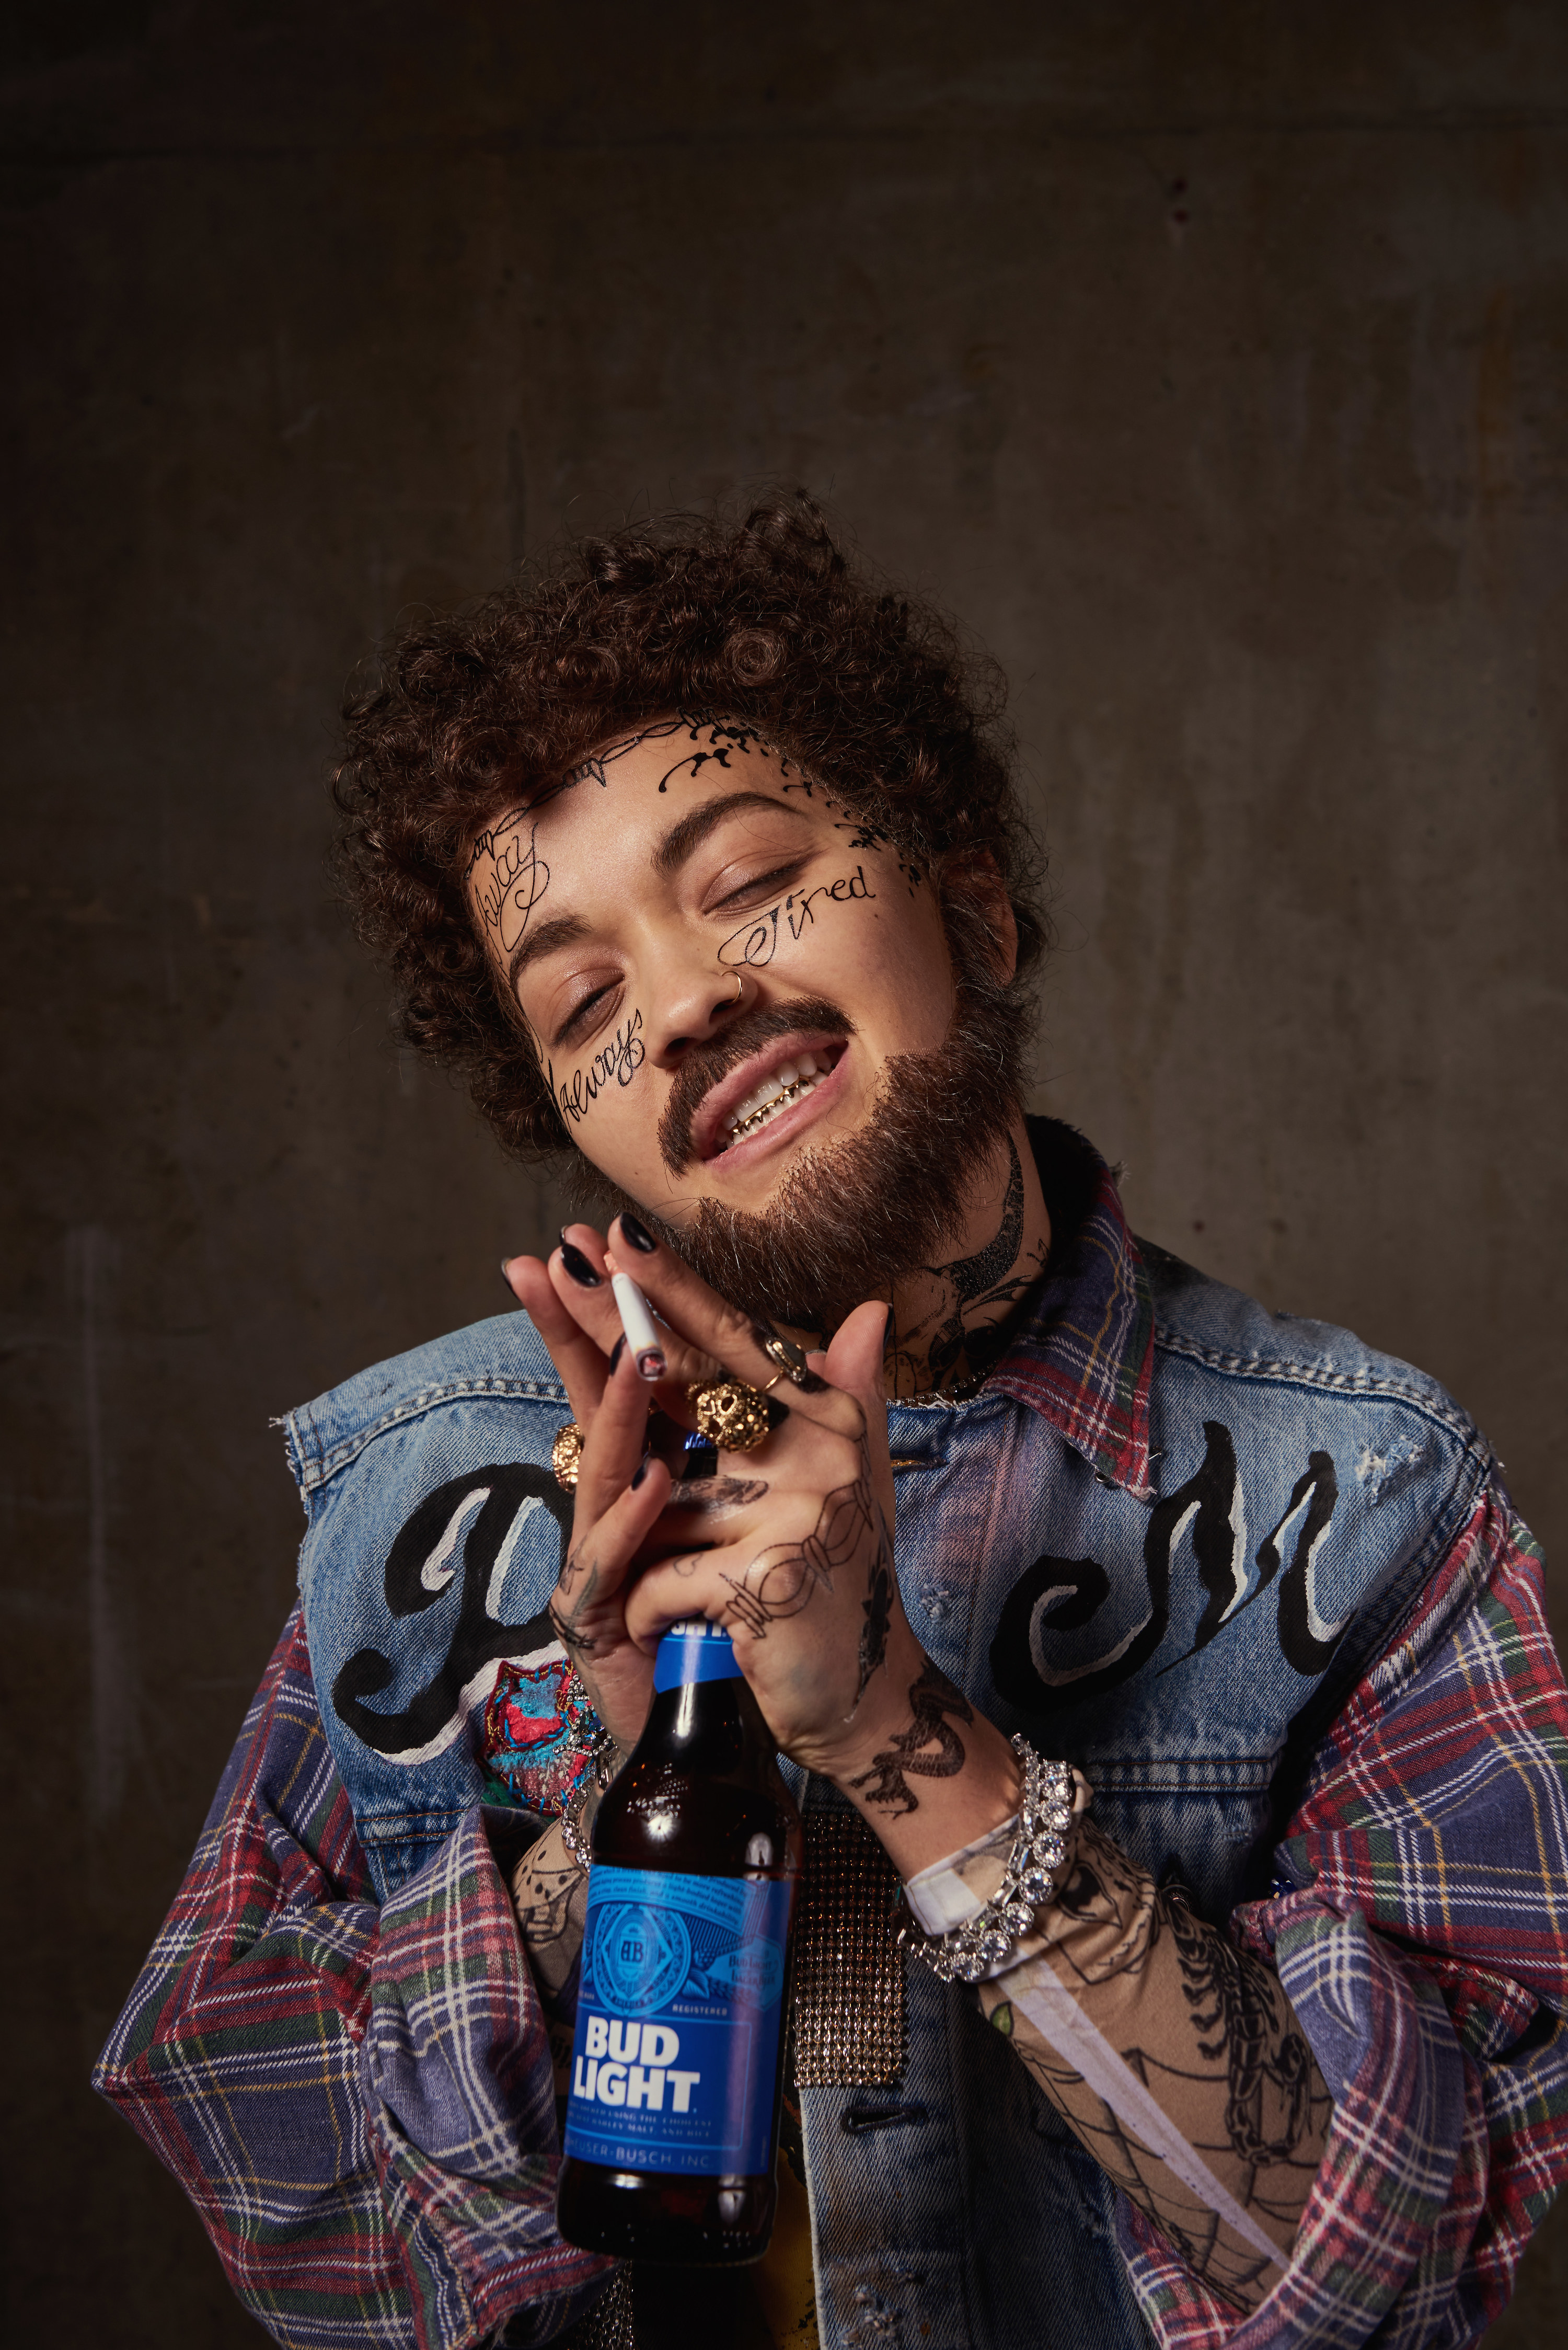 for a bud light ad dressed as a man wearing a denim veset and flannel shirt with tattoos